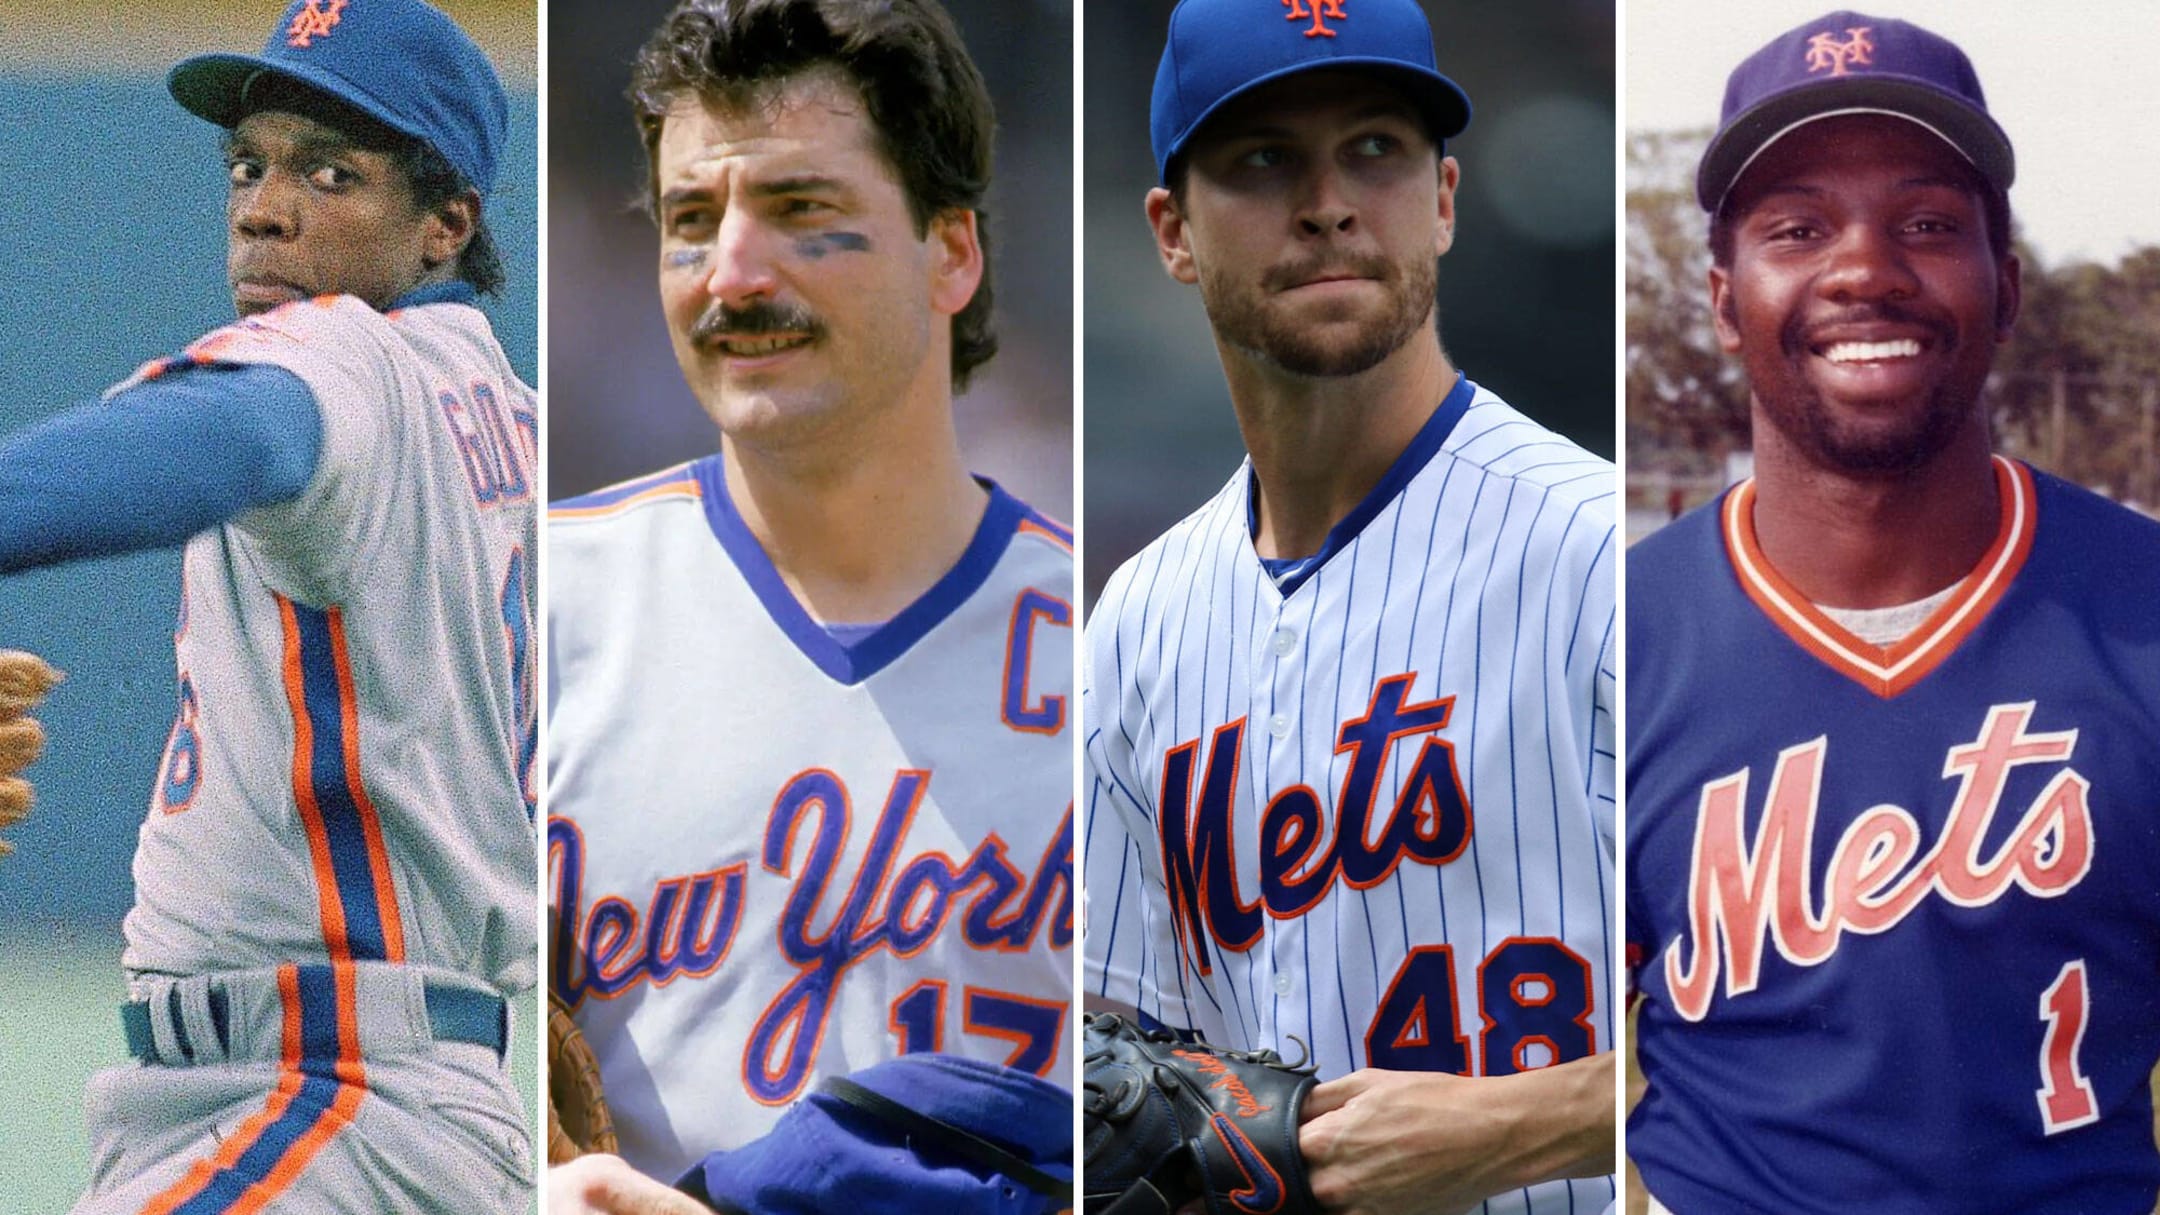 Ex-Mets HoJo excited to see teammates at Old Timers' Day